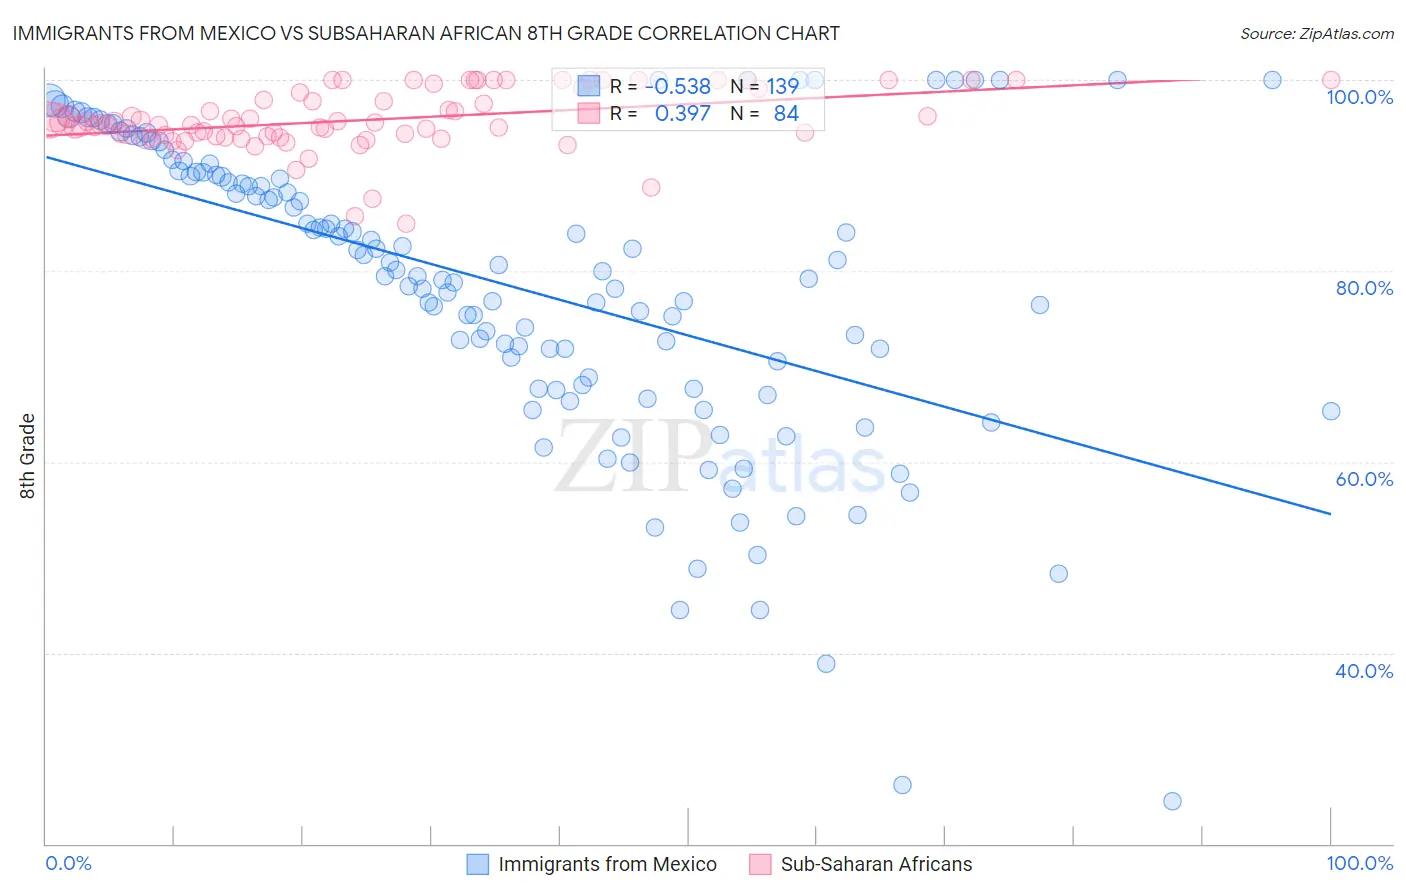 Immigrants from Mexico vs Subsaharan African 8th Grade